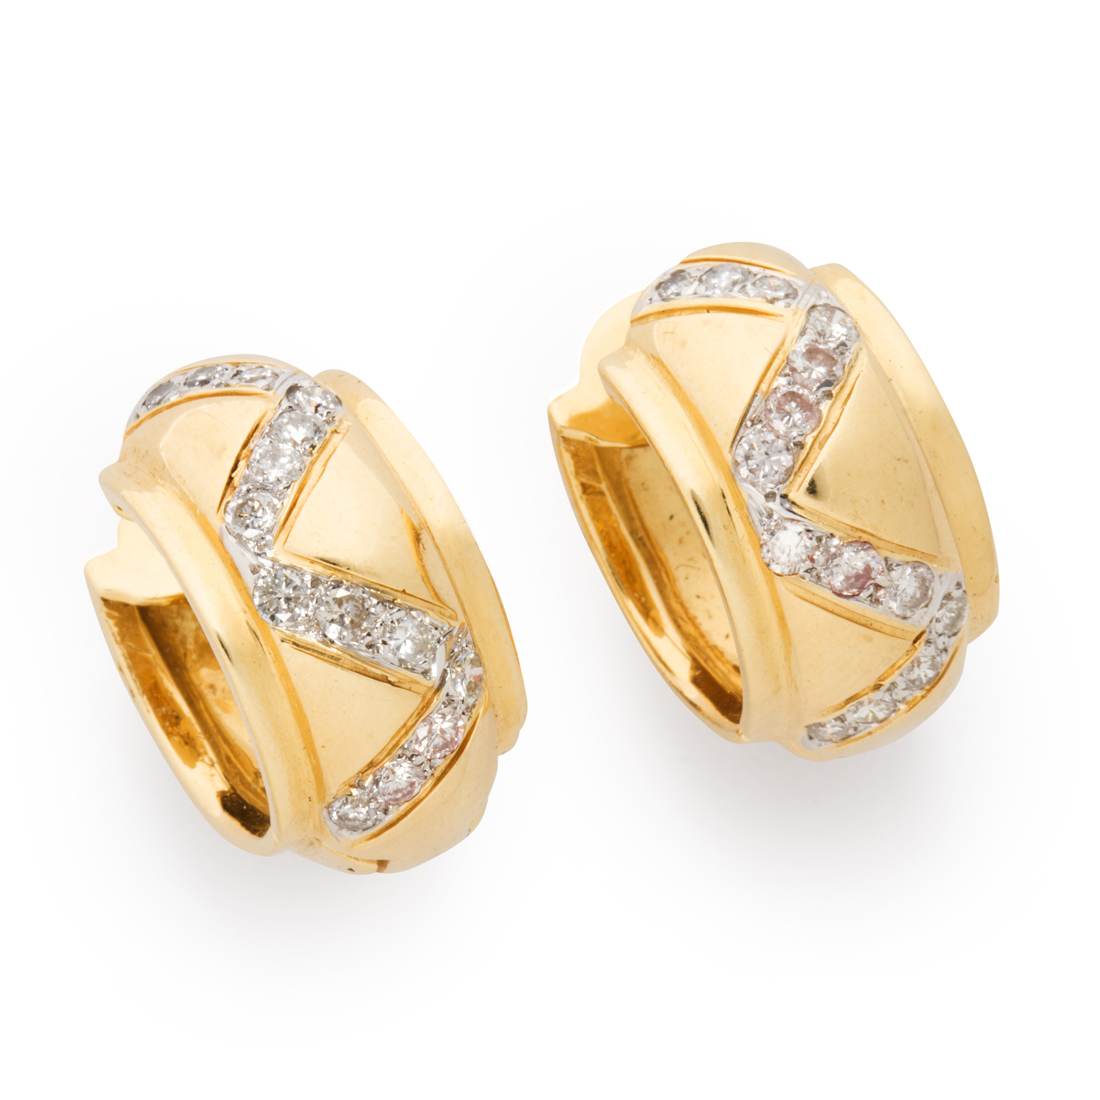 A PAIR OF DIAMOND AND FOURTEEN